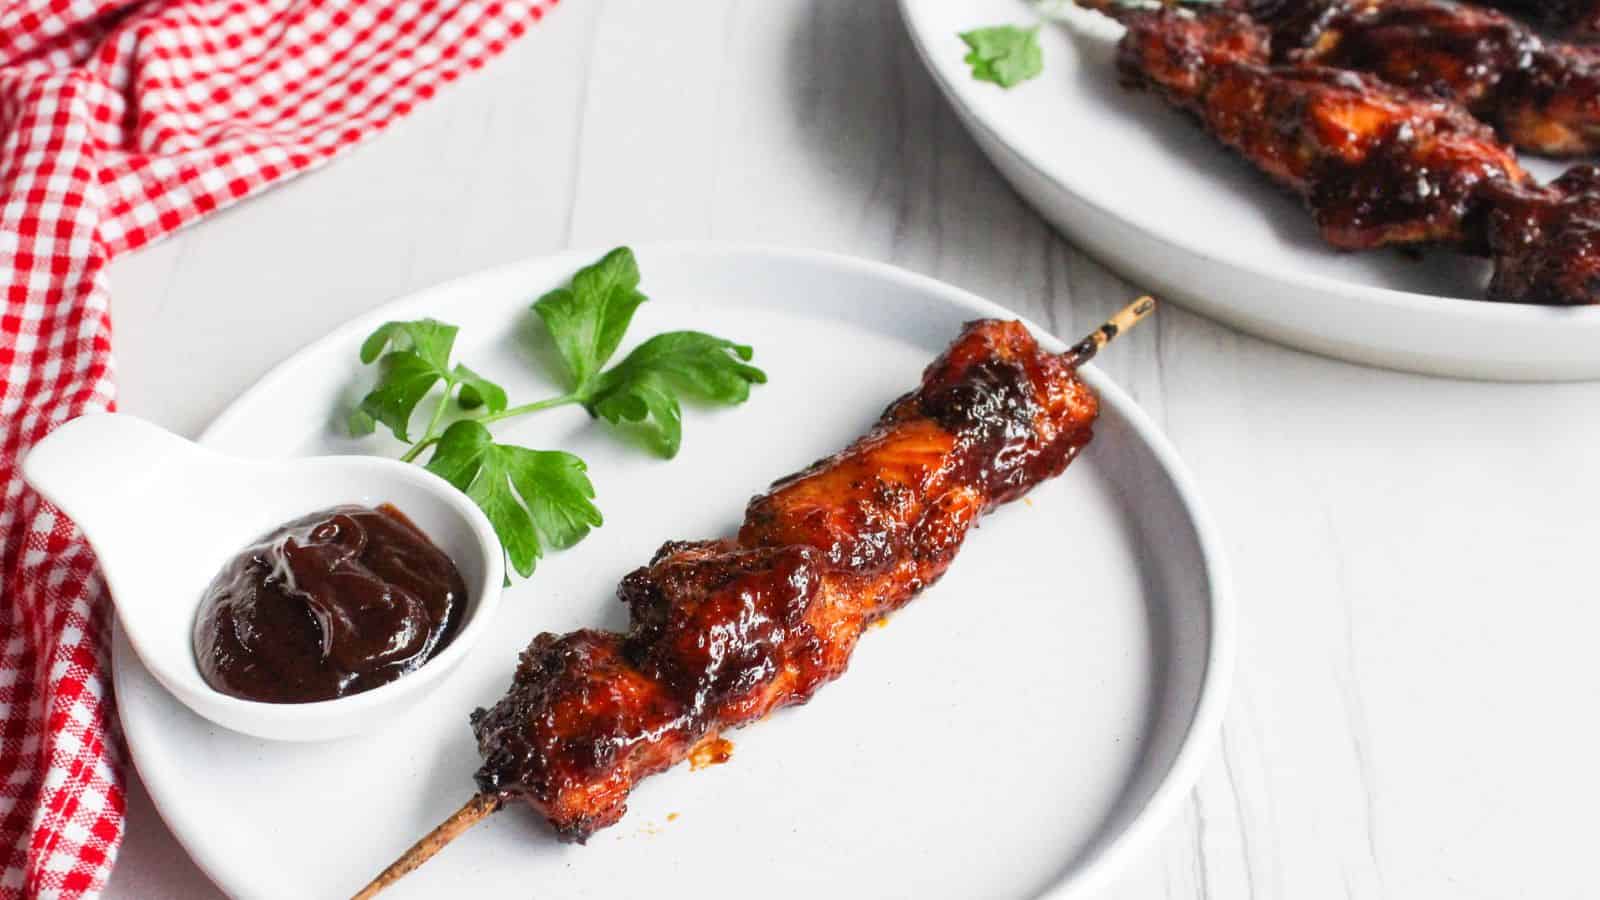 A single barbecued chicken skewer on a white plate, with a small bowl of barbecue sauce and a parsley garnish, next to a plate of additional chicken skewers.